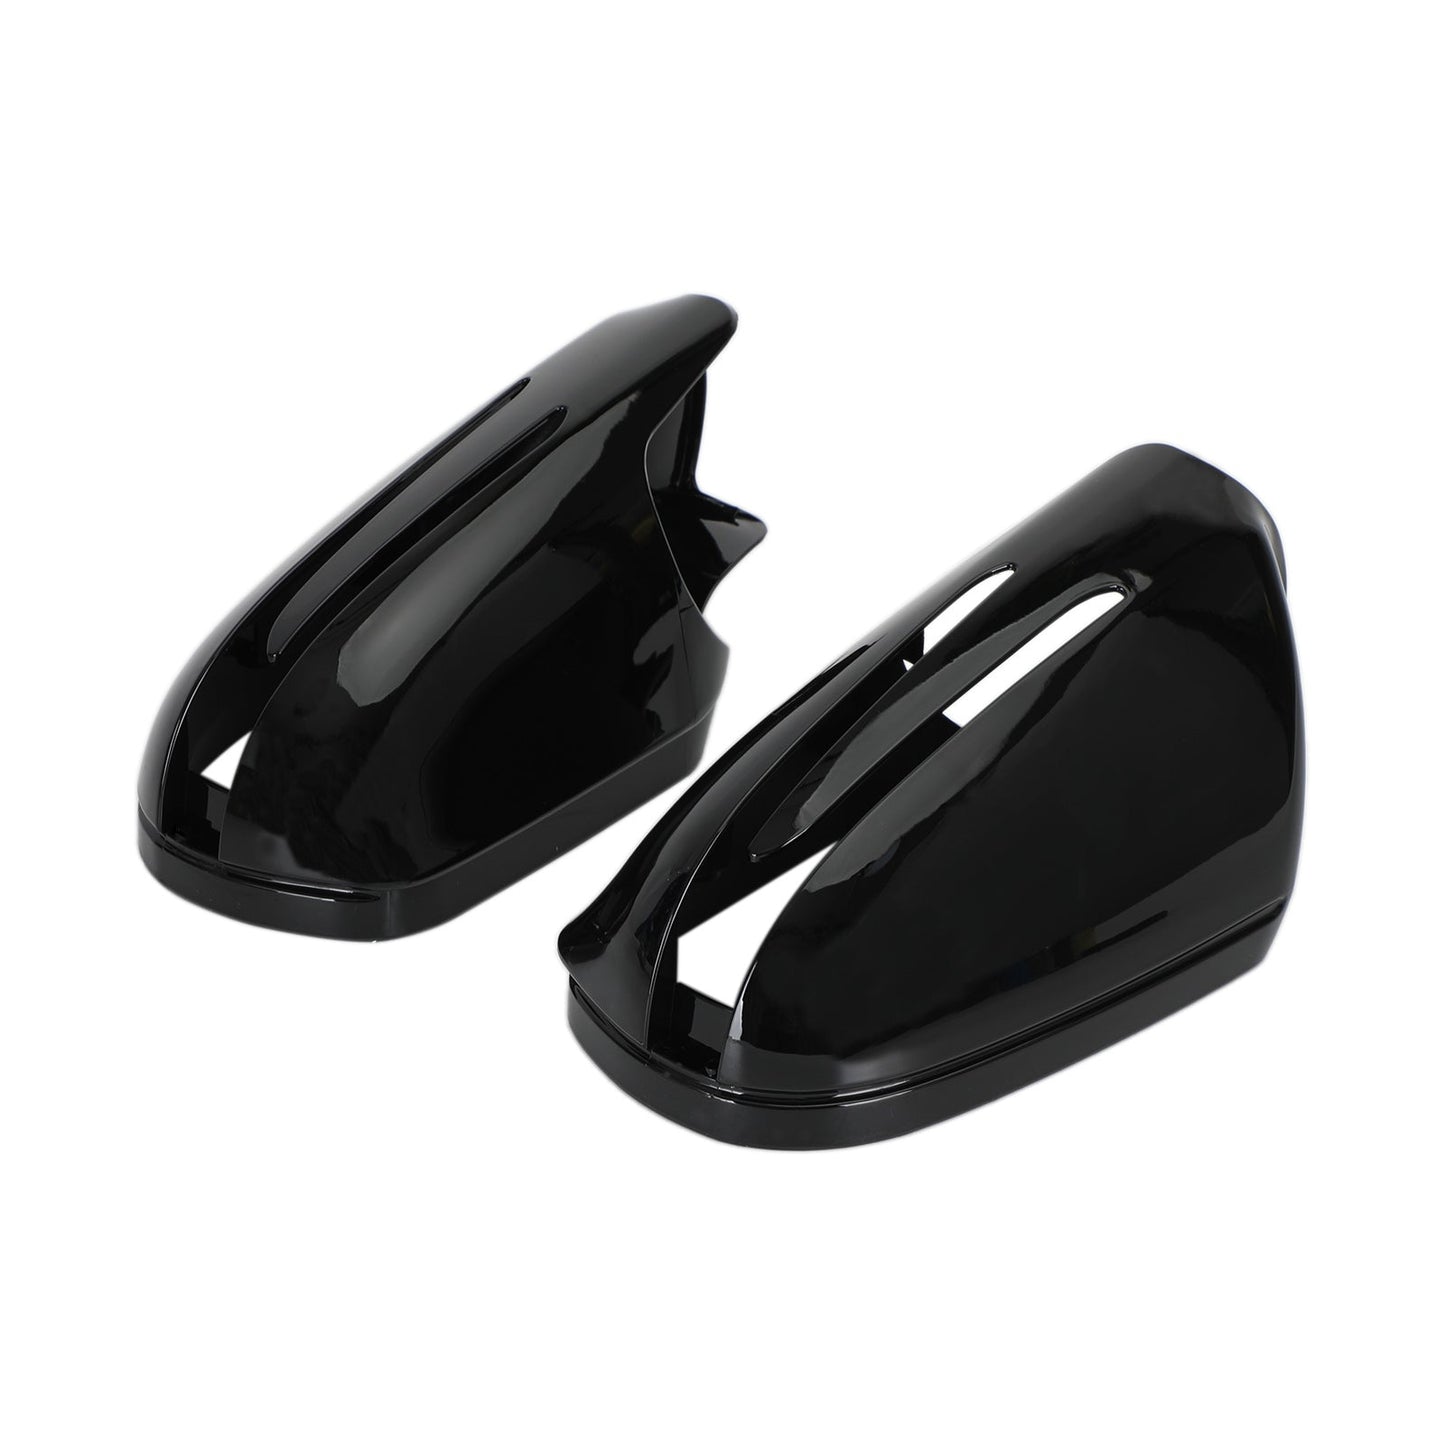 2009-2011 Mercedes BENZ CLS-Class W219 Facelift Pair Rearview Mirror Cover Gloss 1718100364 1718100564 2198100115 2198102576